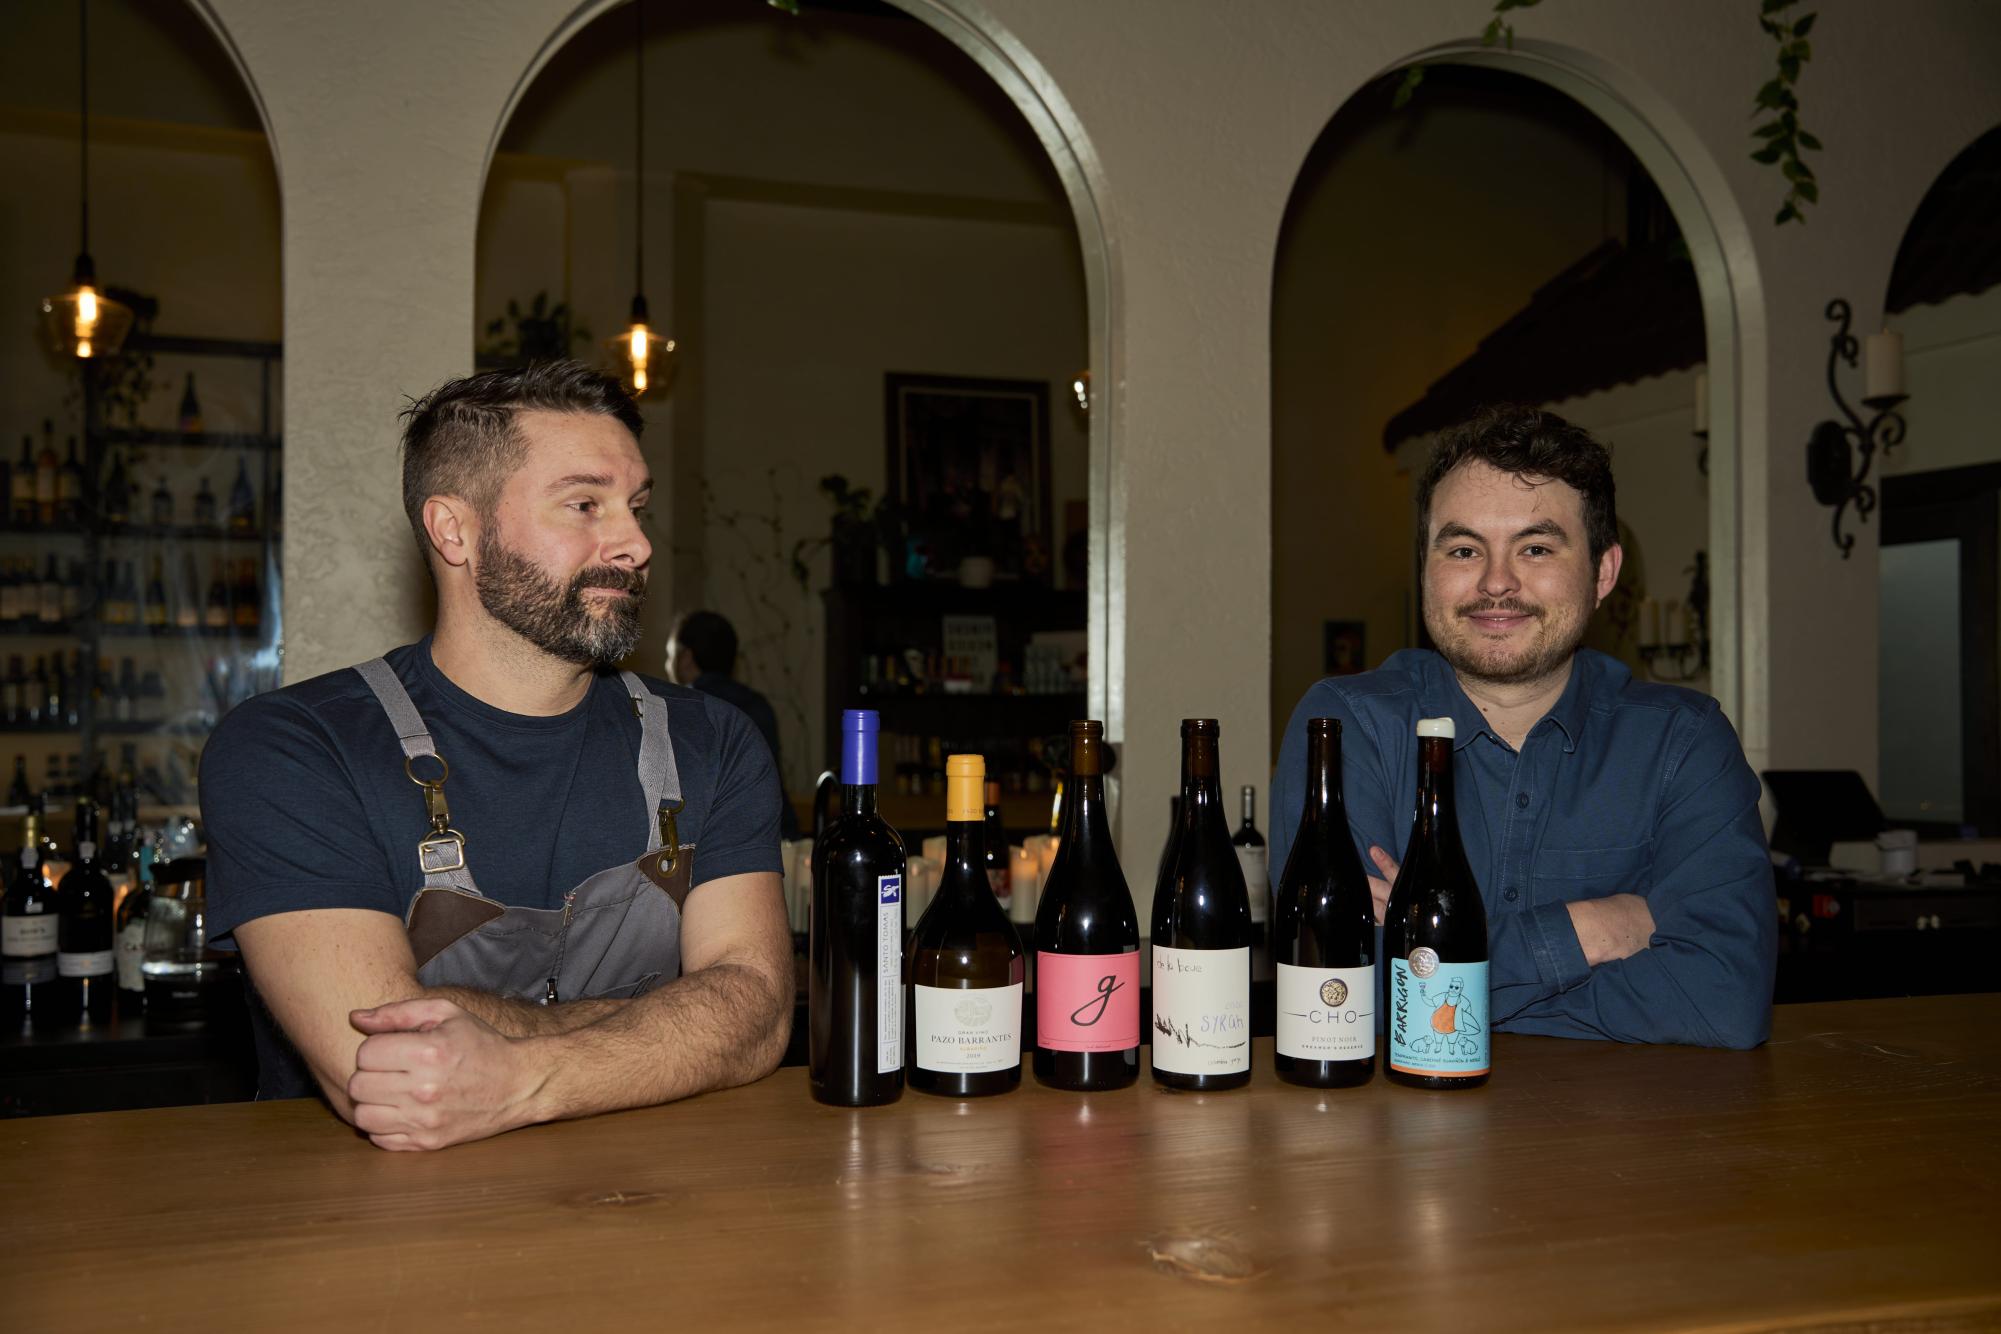  Luke Carlson (left) and Nick Cheatham showcasing some of their favorite wines from the wine wall in Corazon, in Corvallis on Dec. 1. Nick (right), being the owner of Corazon, loves to showcase Mexican wines and wines from many parts of the world, along with local vineyards. 